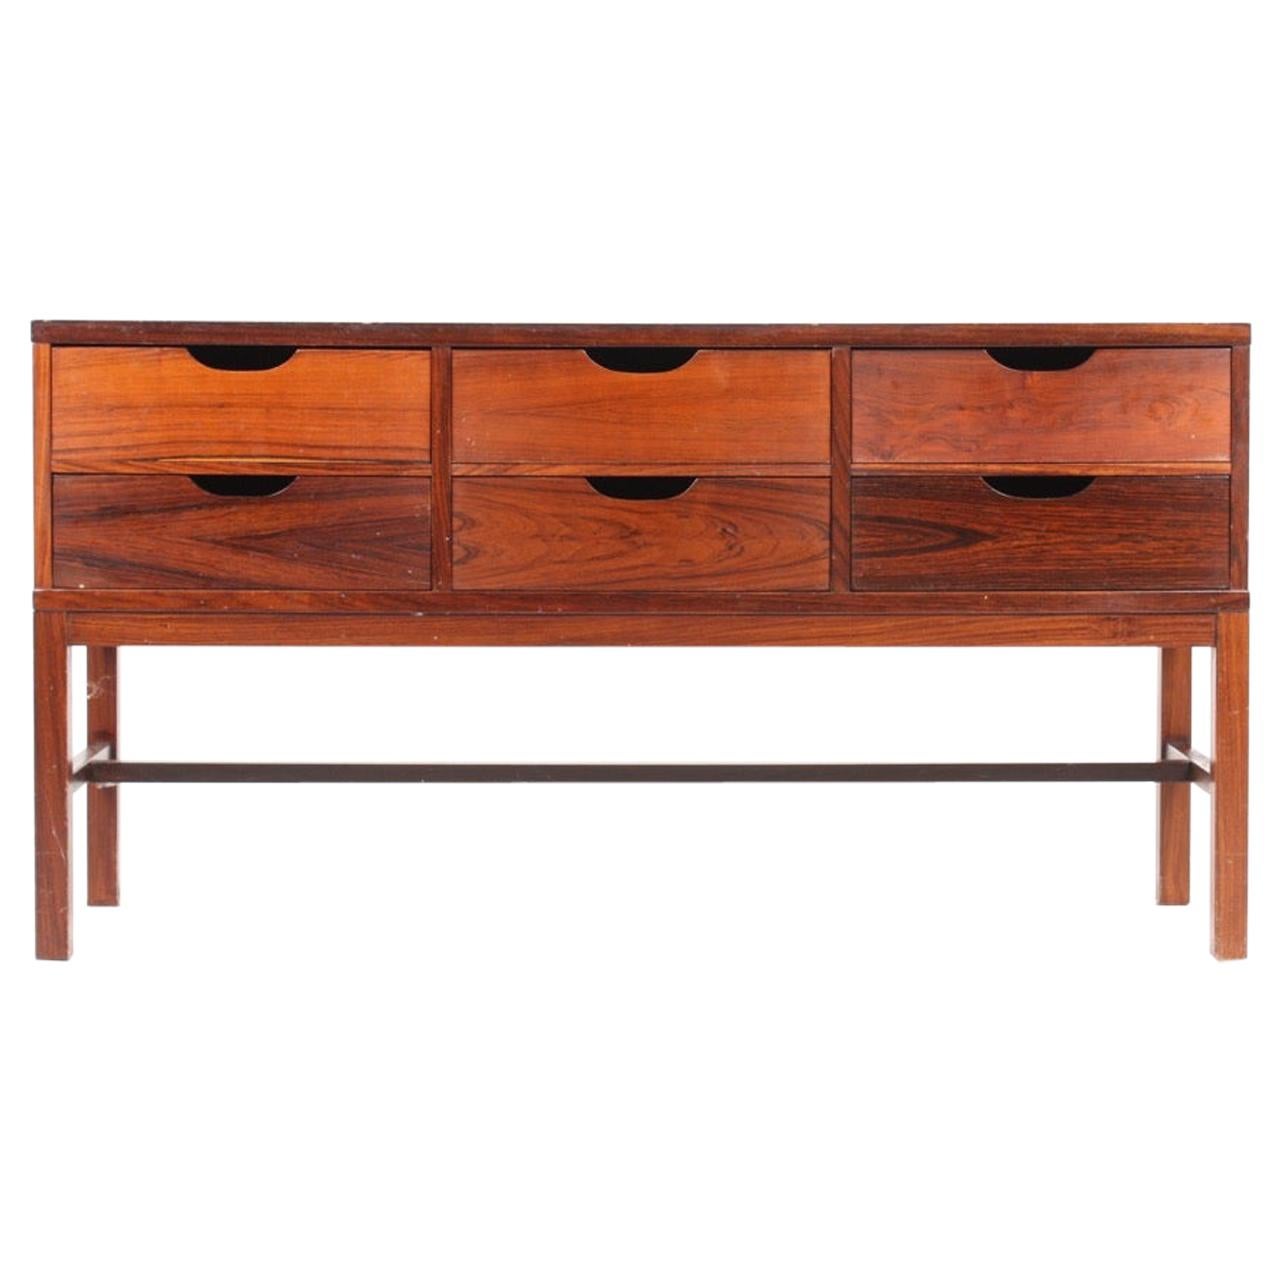 Midcentury Chest of Drawers in Rosewood, Tile Top by Royal Copenhagen